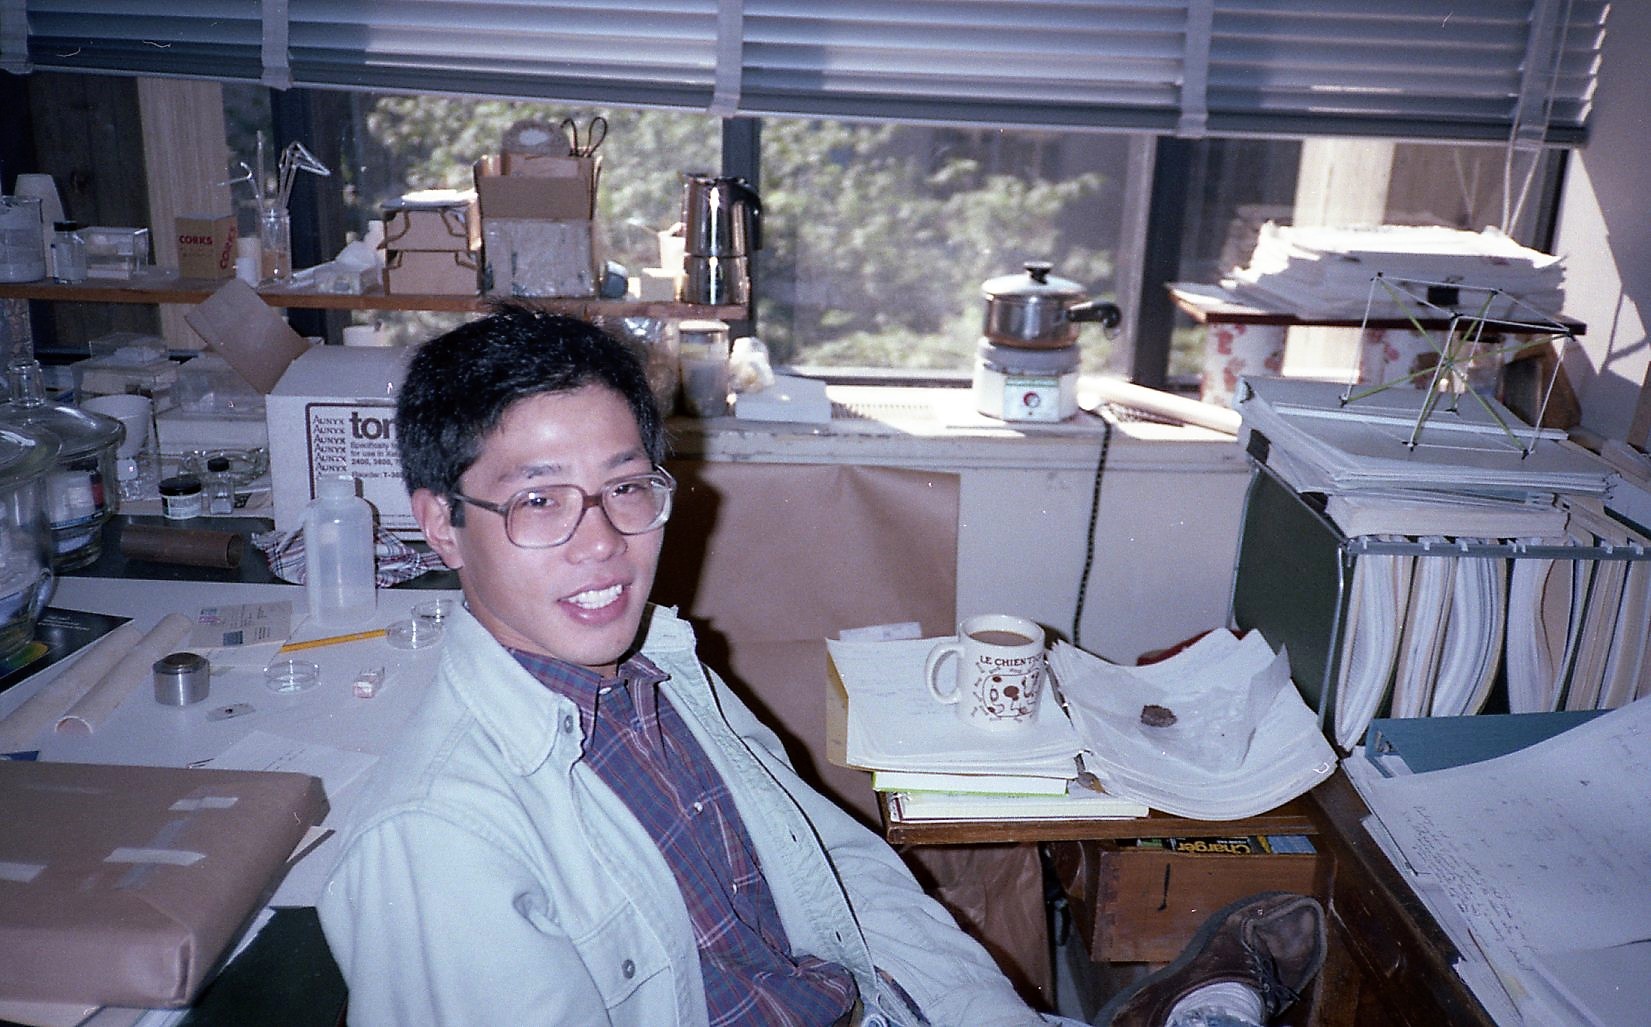 A man smiles in a scientific laboratory/office, old photograph clearly circa the 1980s.